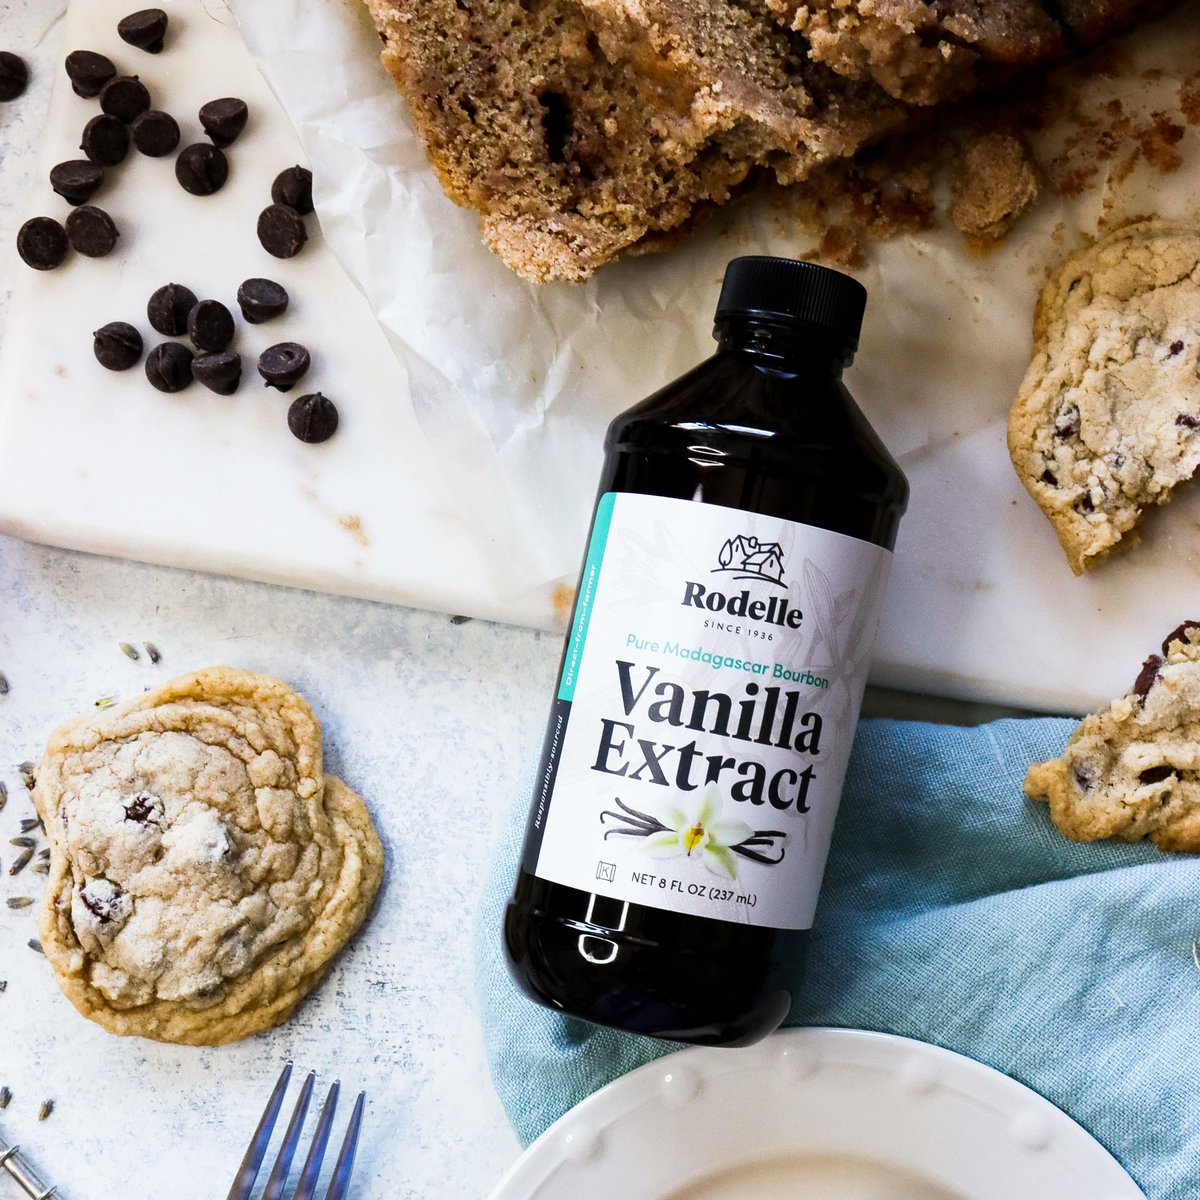 Spring baking is upon us! Don't forget to stock up on baking products - like our Rodelle Pure Madagascar Bourbon Extract! 

Find where to buy our Rodelle products on our website!
.
.
.
#sharerodelle #rodellevanilla #vanillaextract #springbaking #bake #bakersoftwitter #spring2023